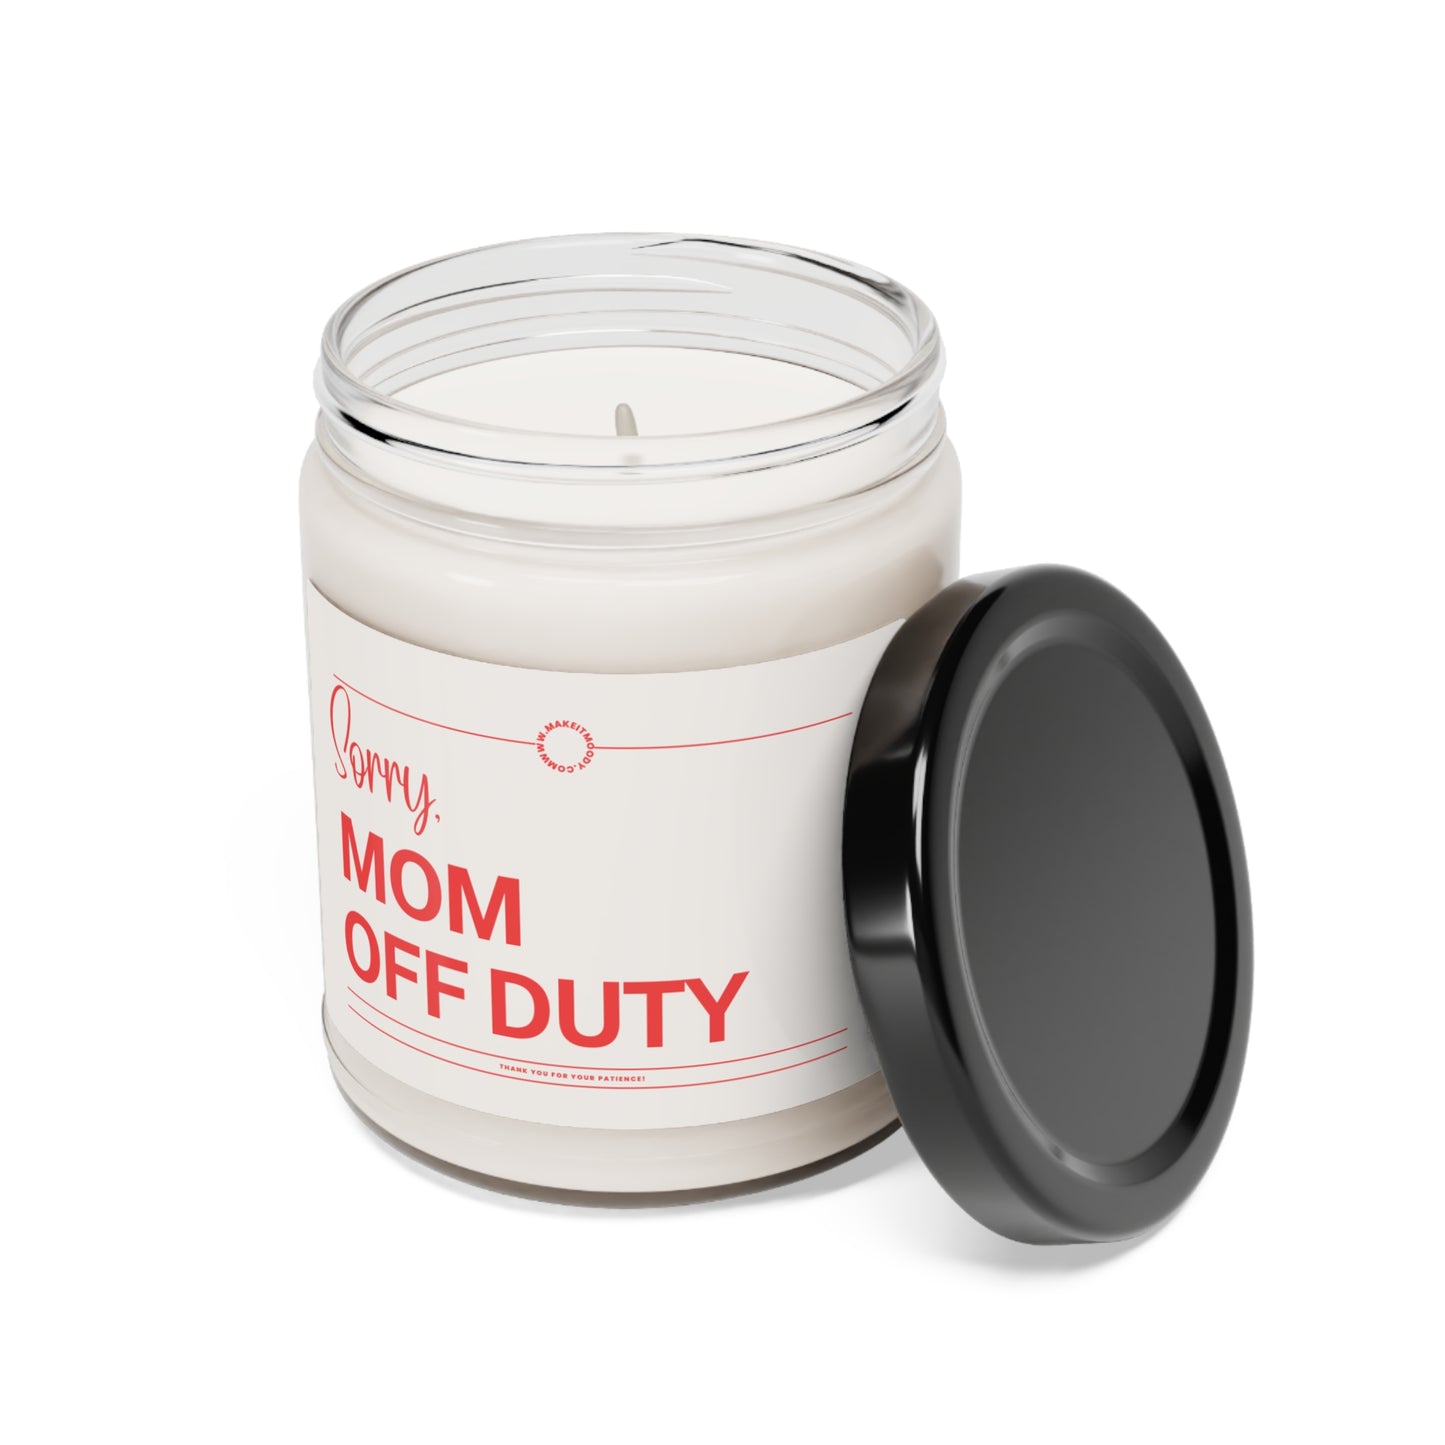 "Sorry, Mom Off Duty" Scented Soy Candle, 9oz